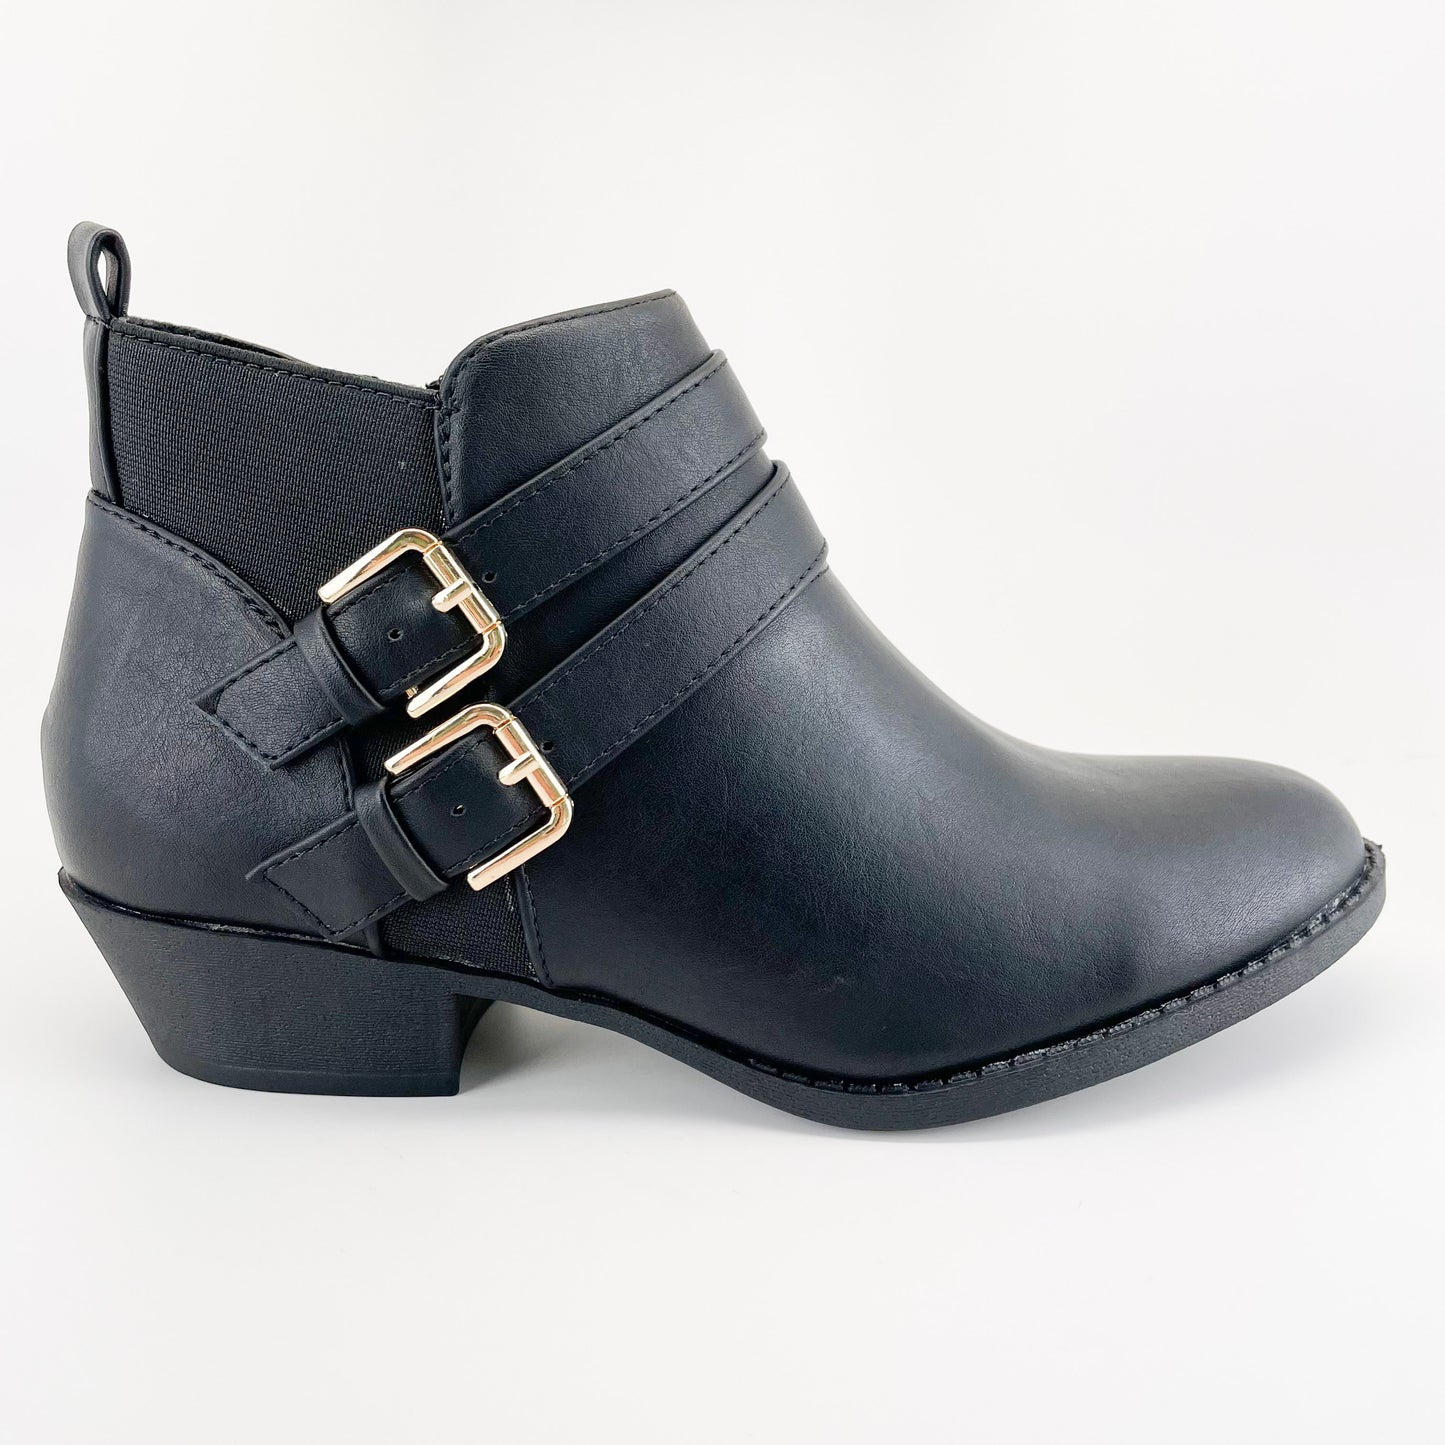 "Fern" Short Boots with Buckles